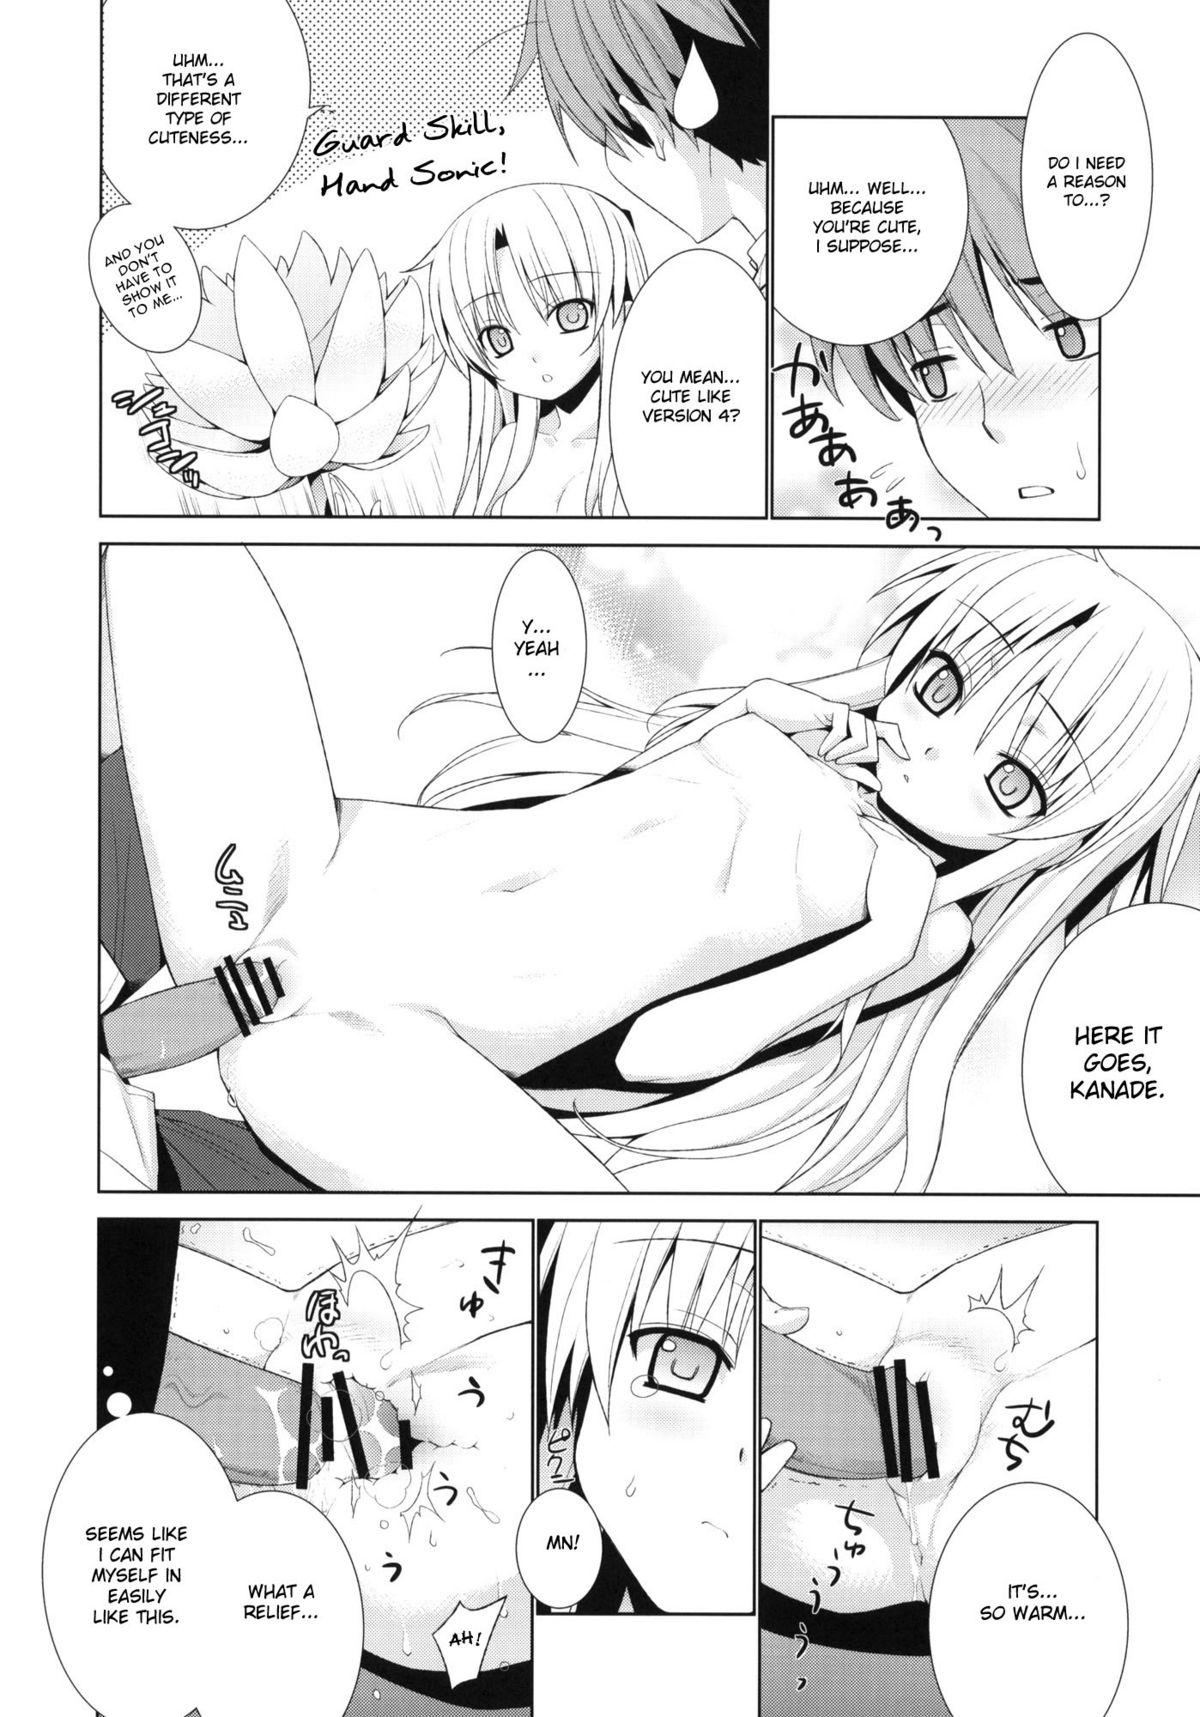 Boots Angel Days - Angel beats Pica - Page 9